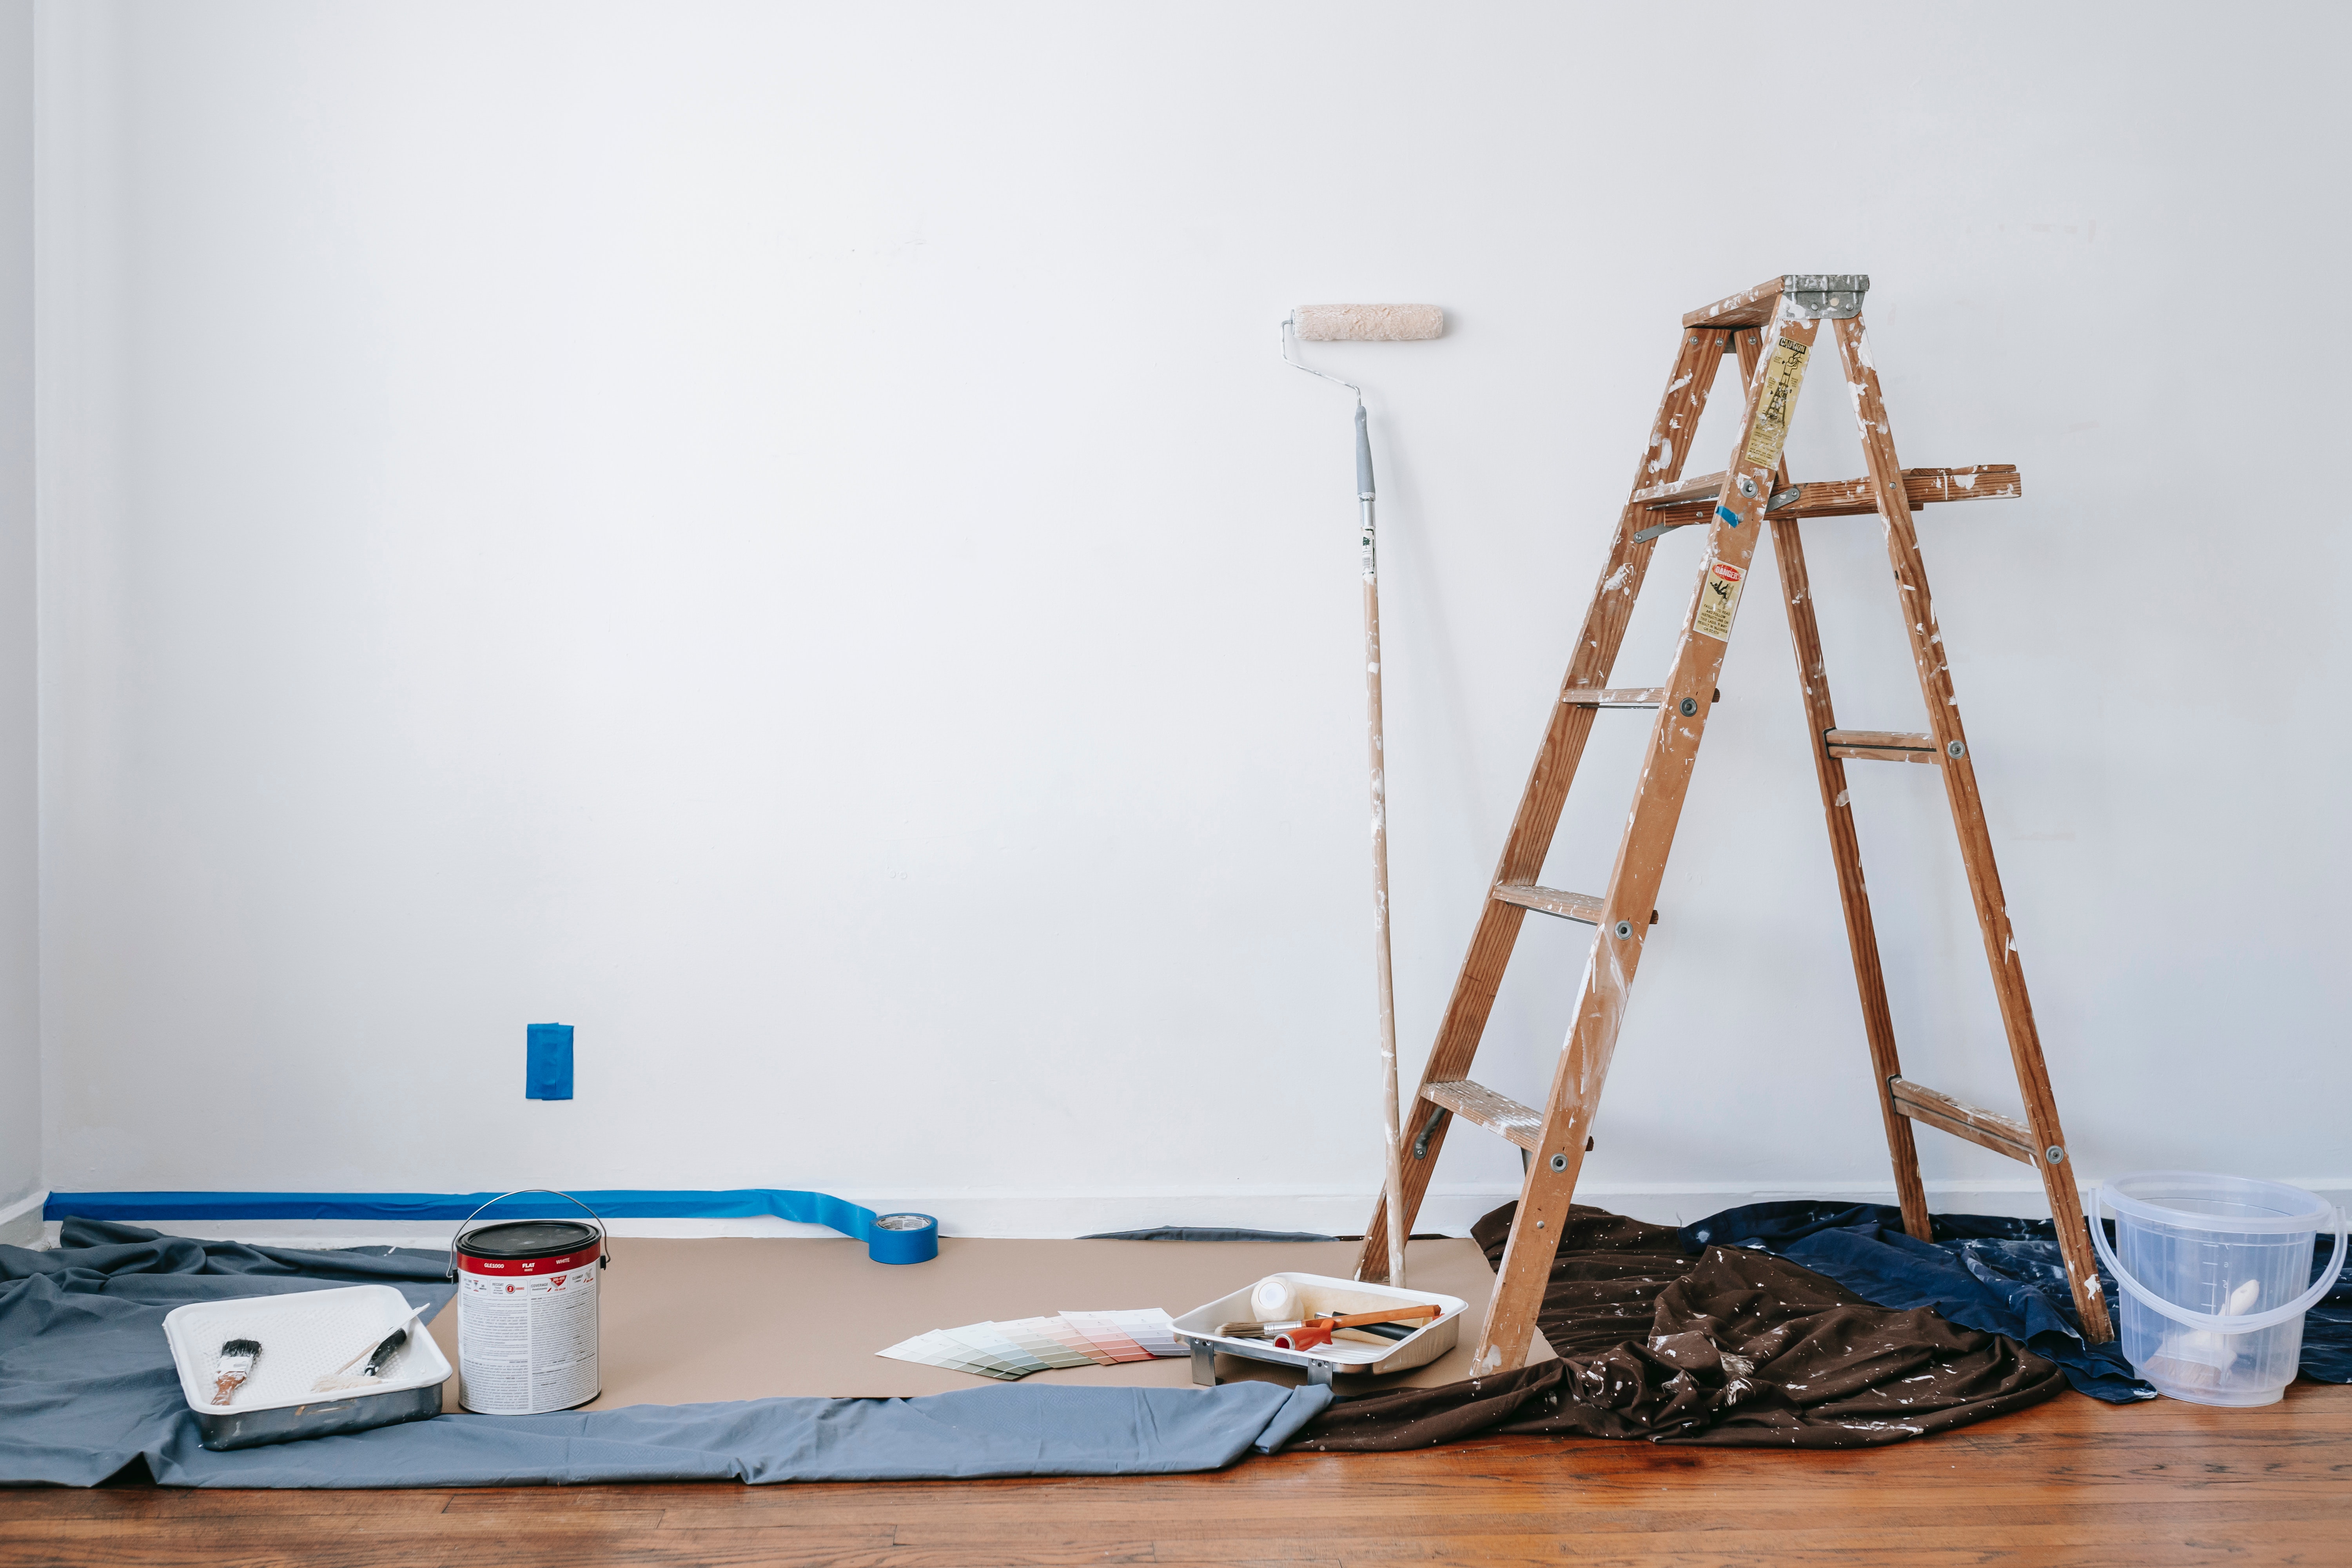 stock photo for painting services showing living room, white wall, painting supplies, and ladder